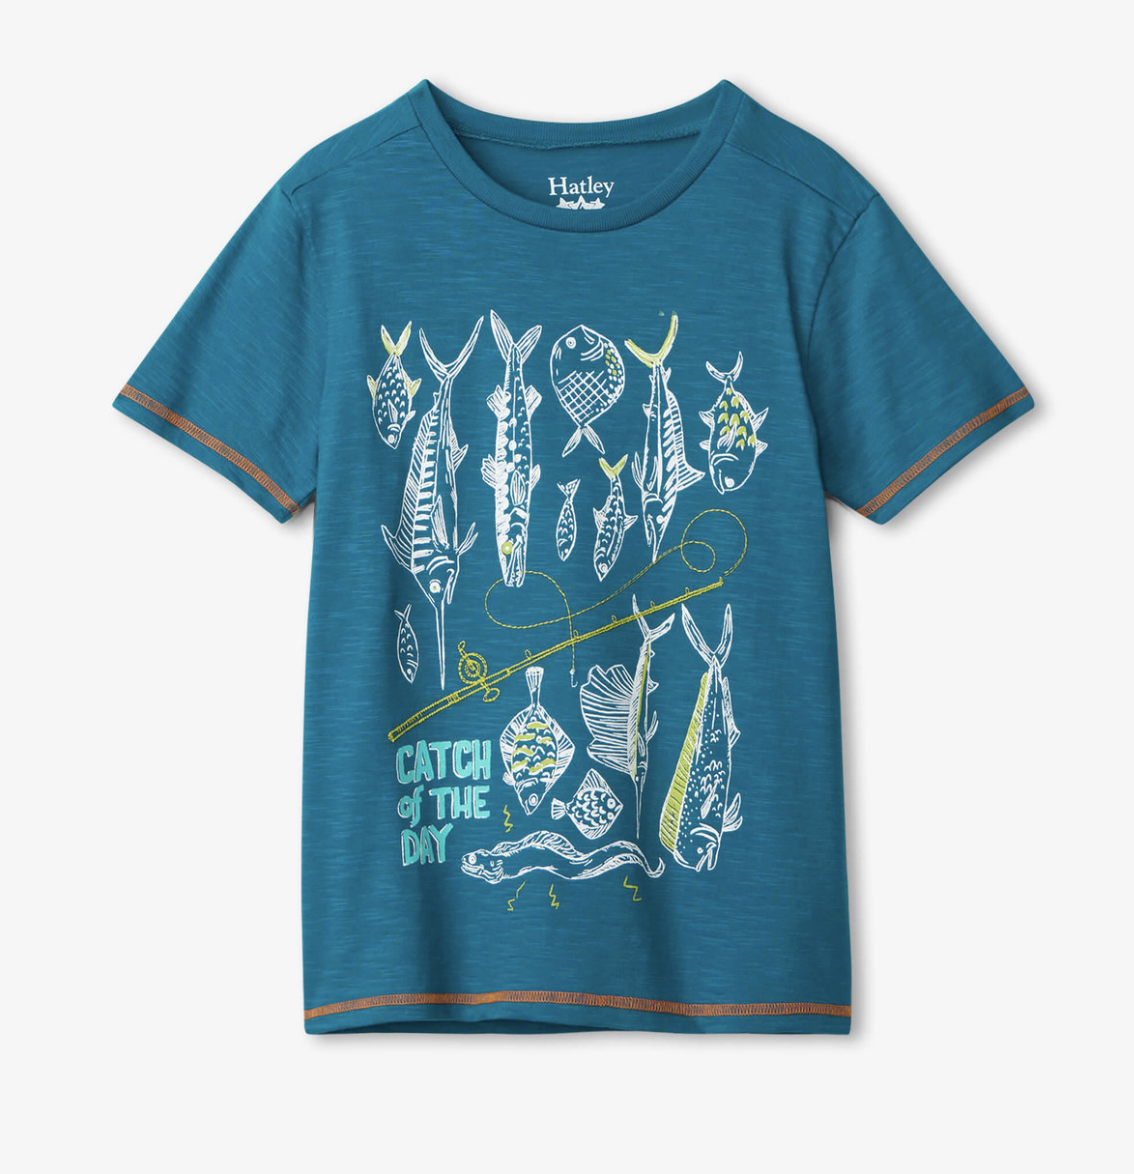 Catch of the Day Graphic Tee